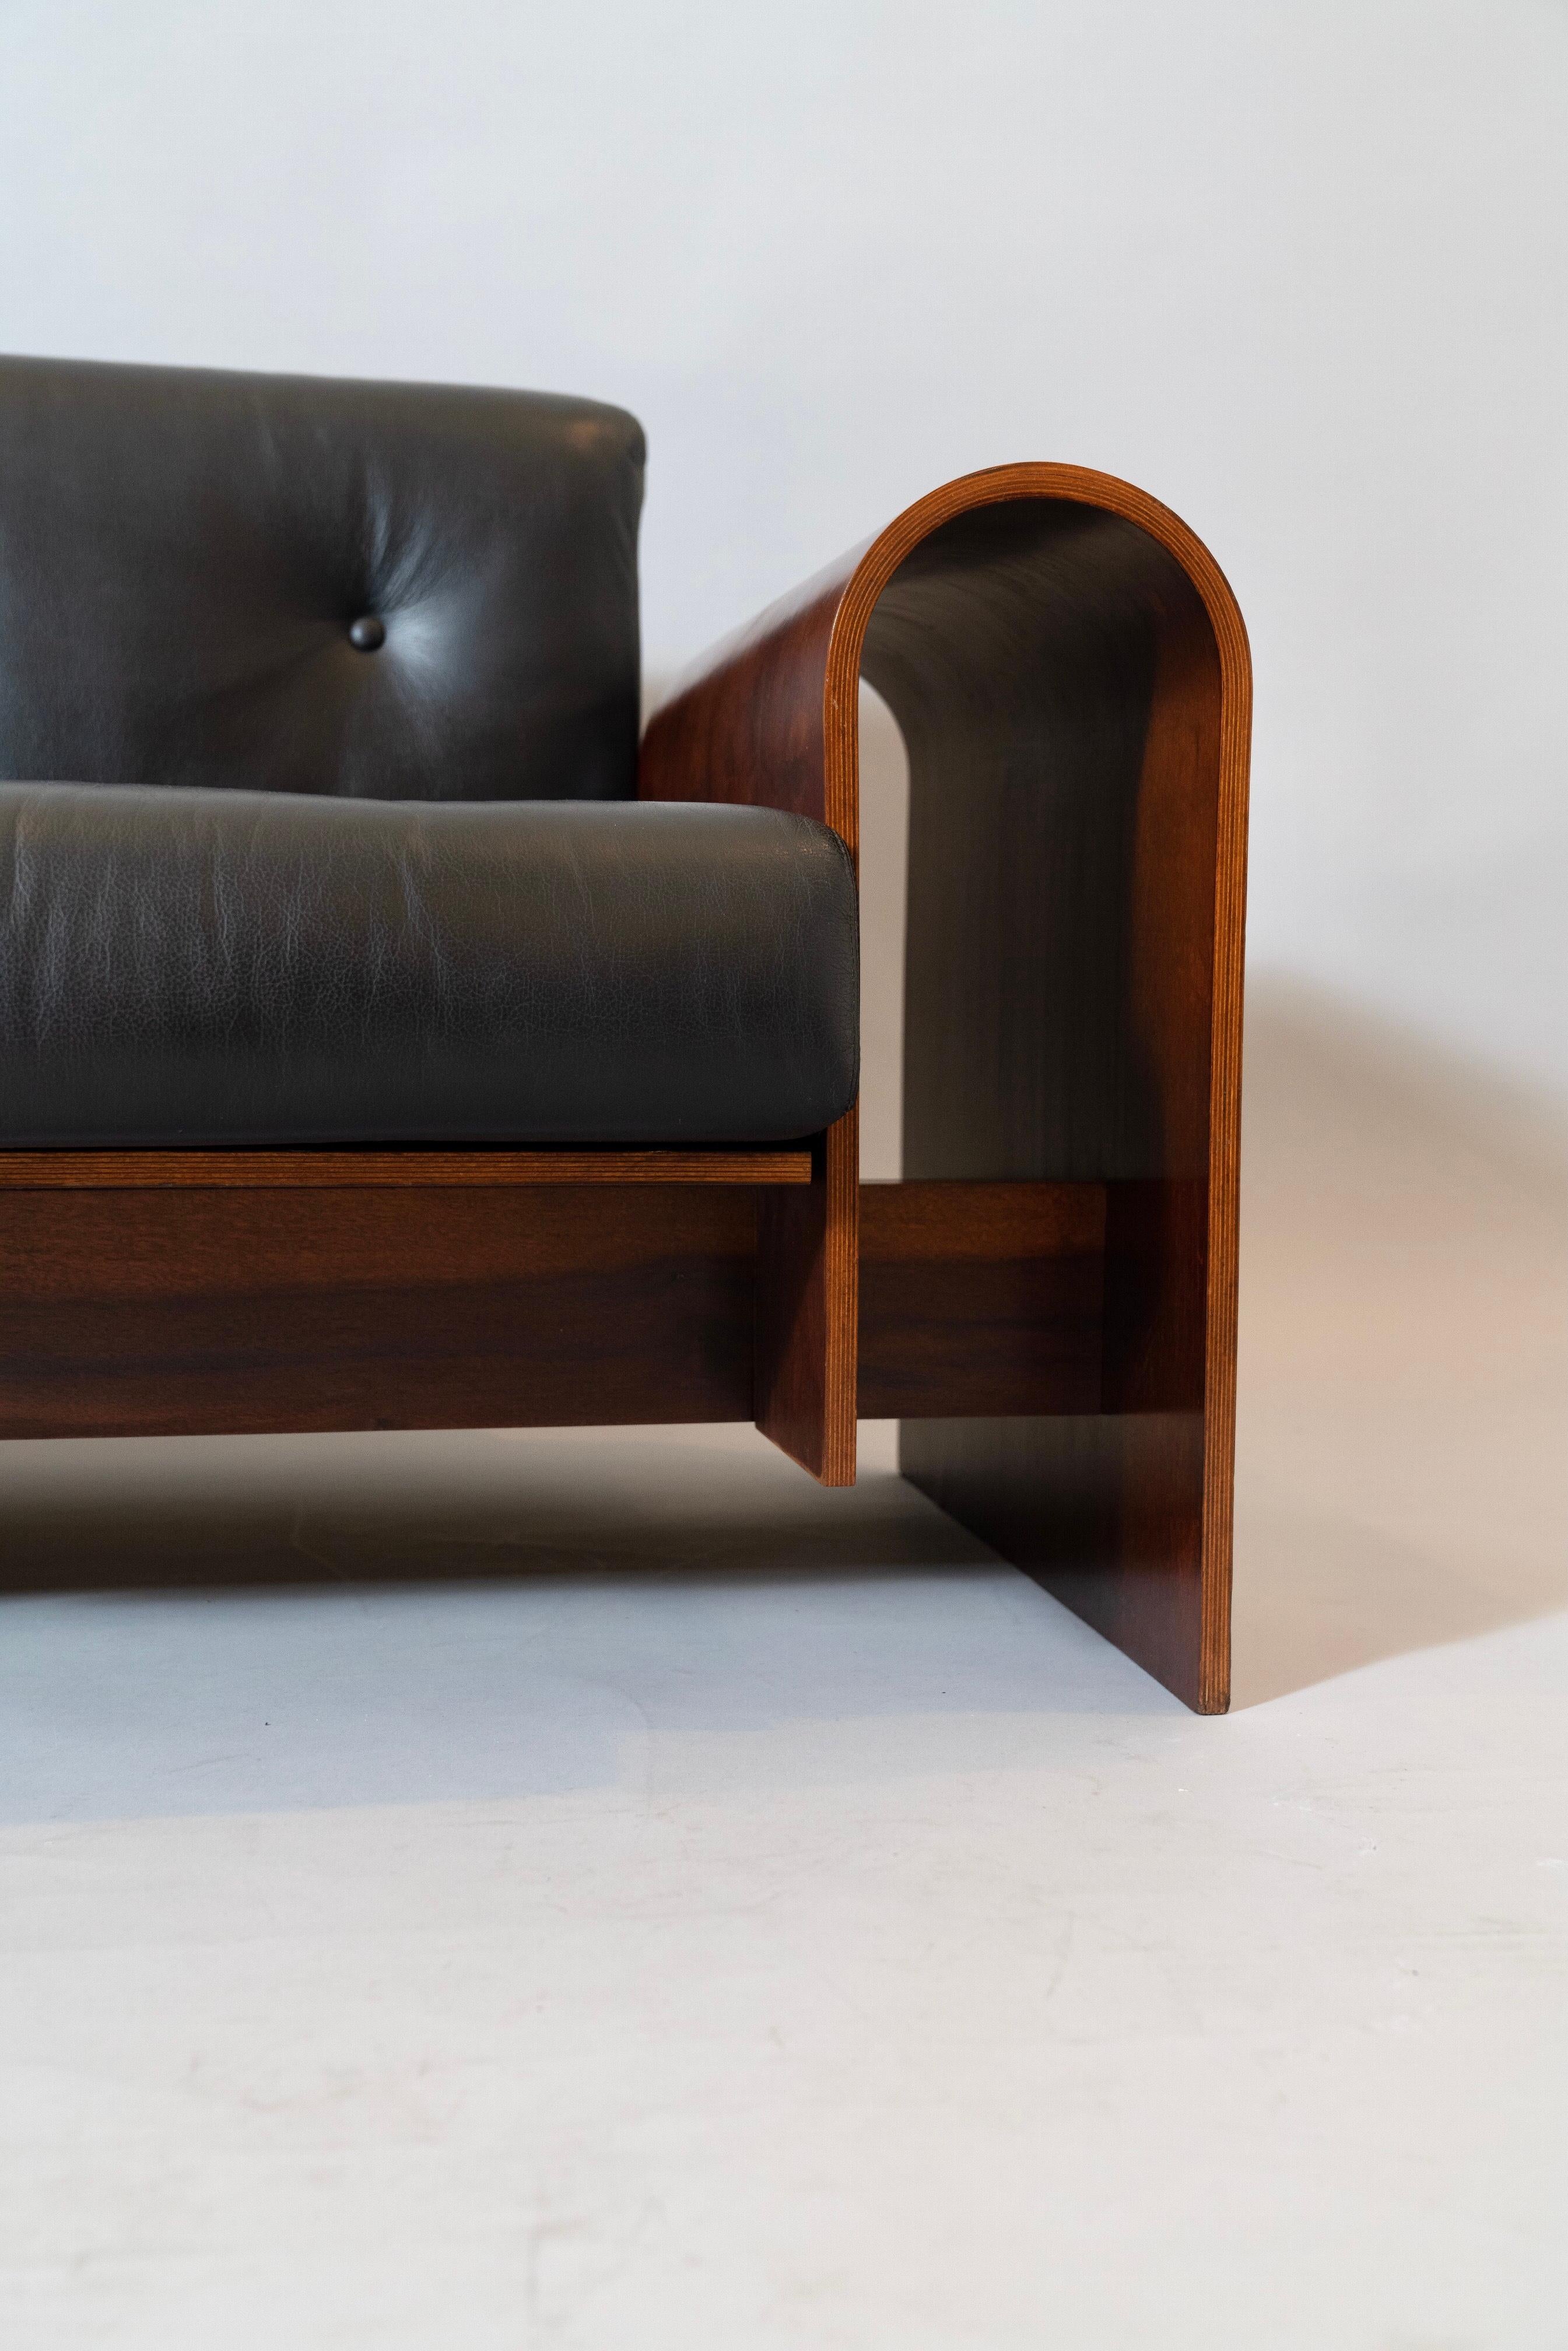 Oscar Niemeyer Exceptional Sofa in Rosewood and Leather, Hotel SESC, Brazil 1990 6